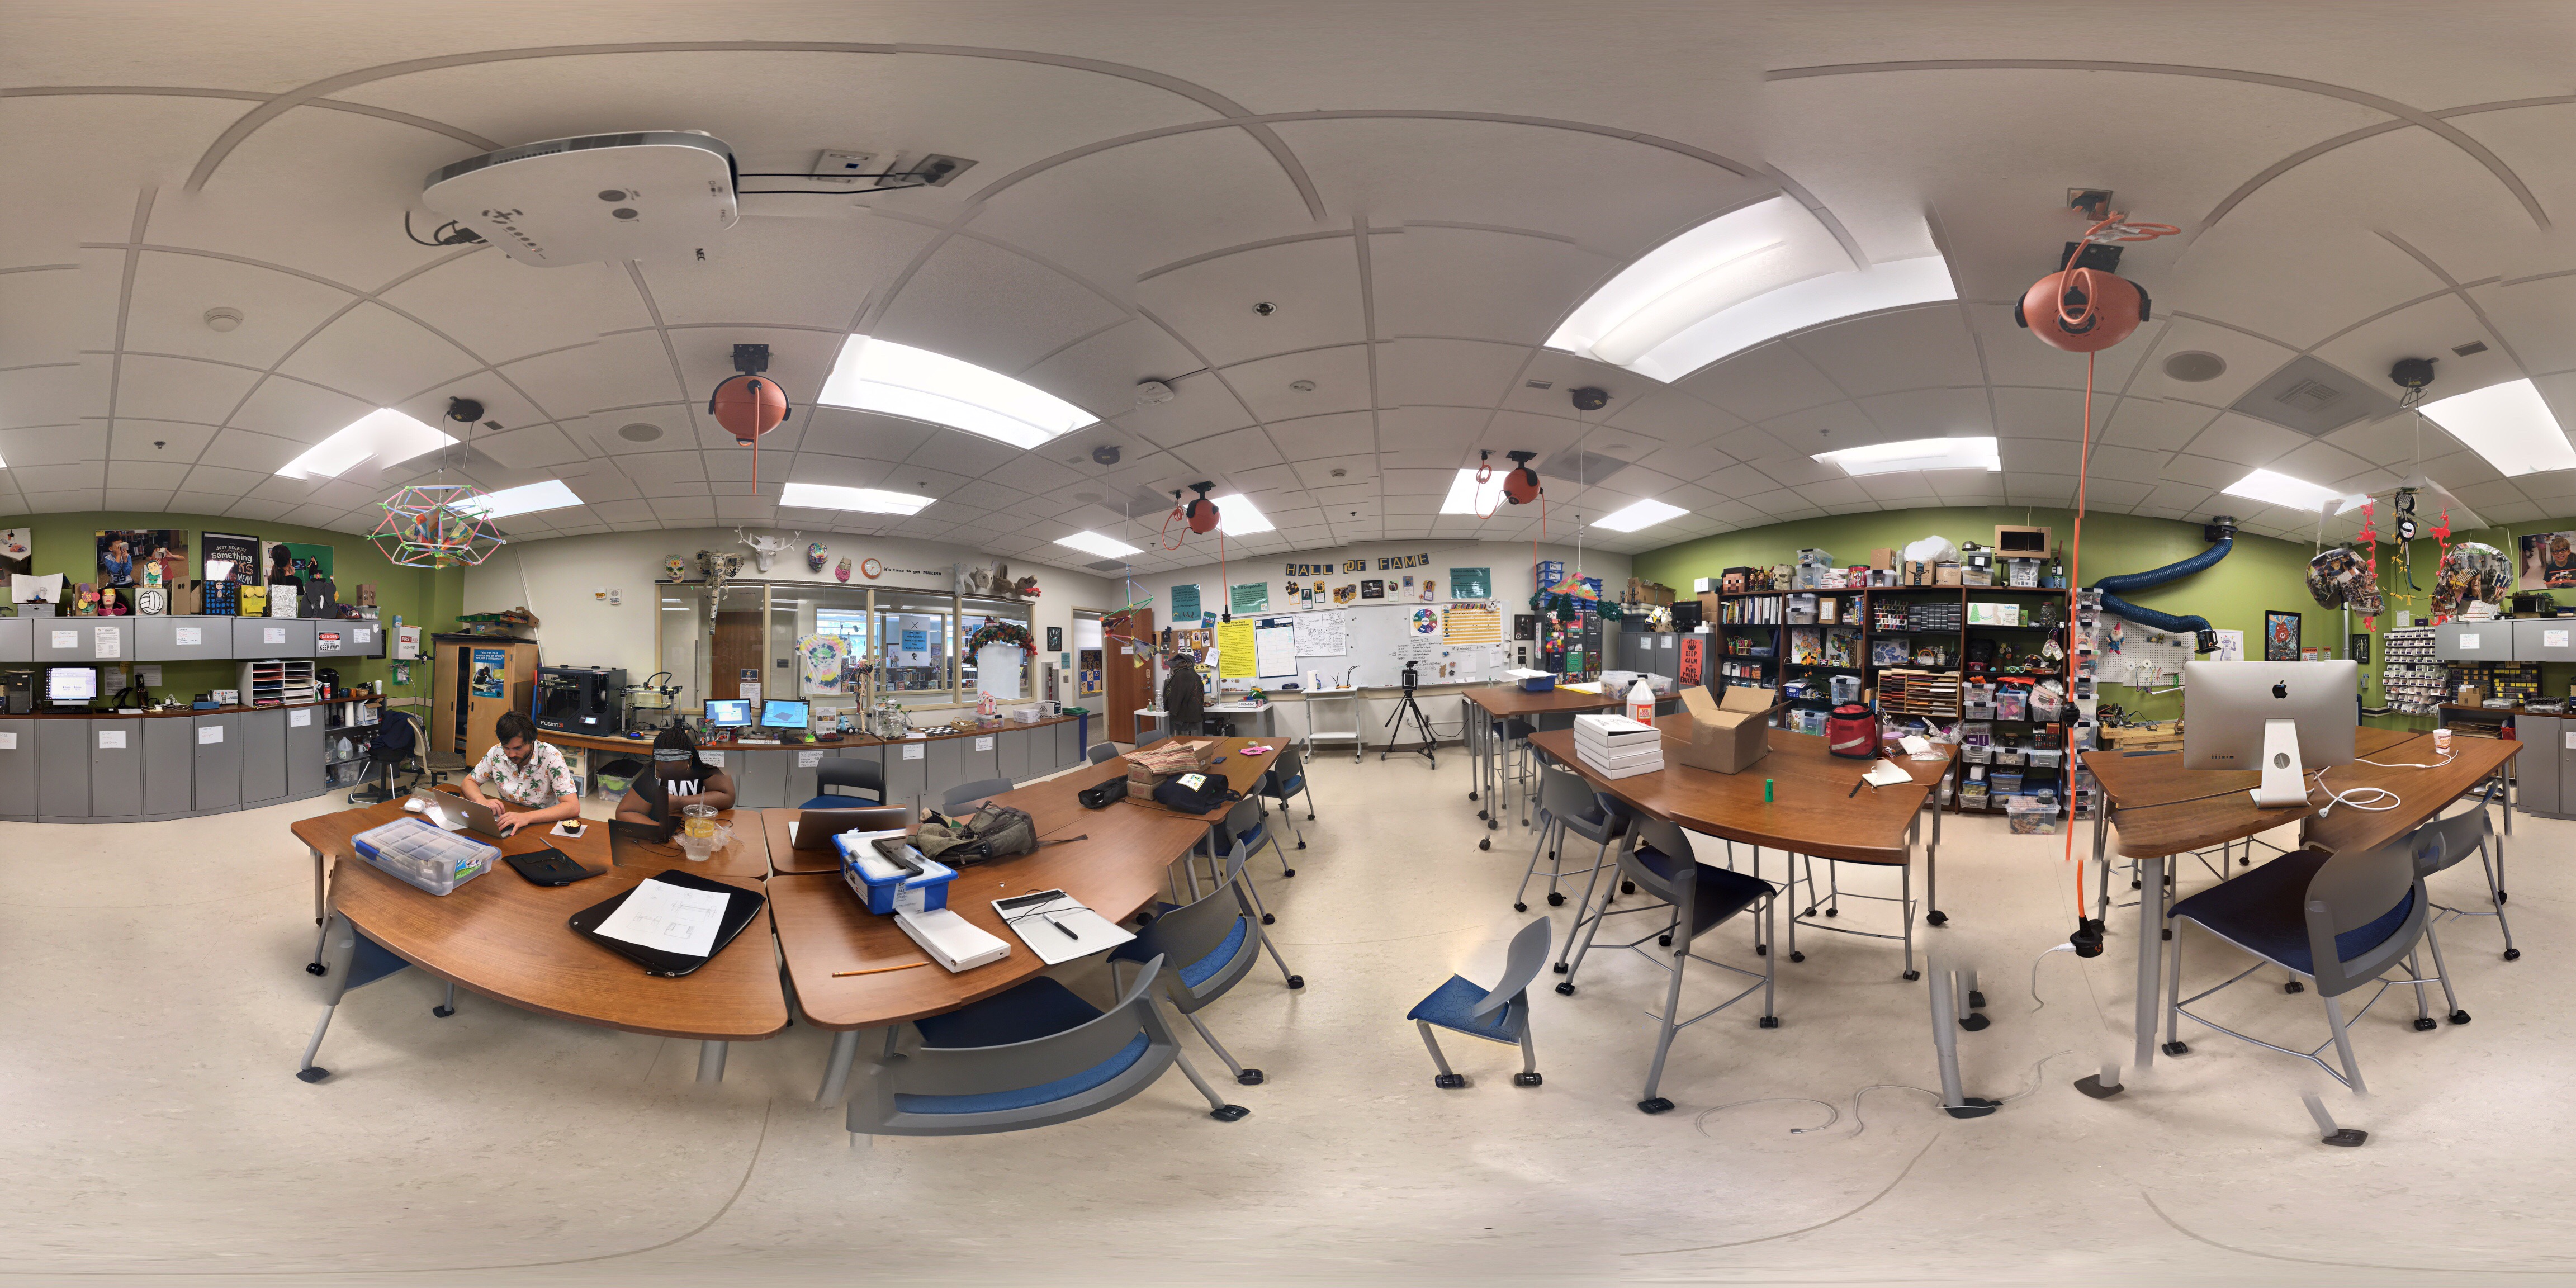 360 view of the SDS